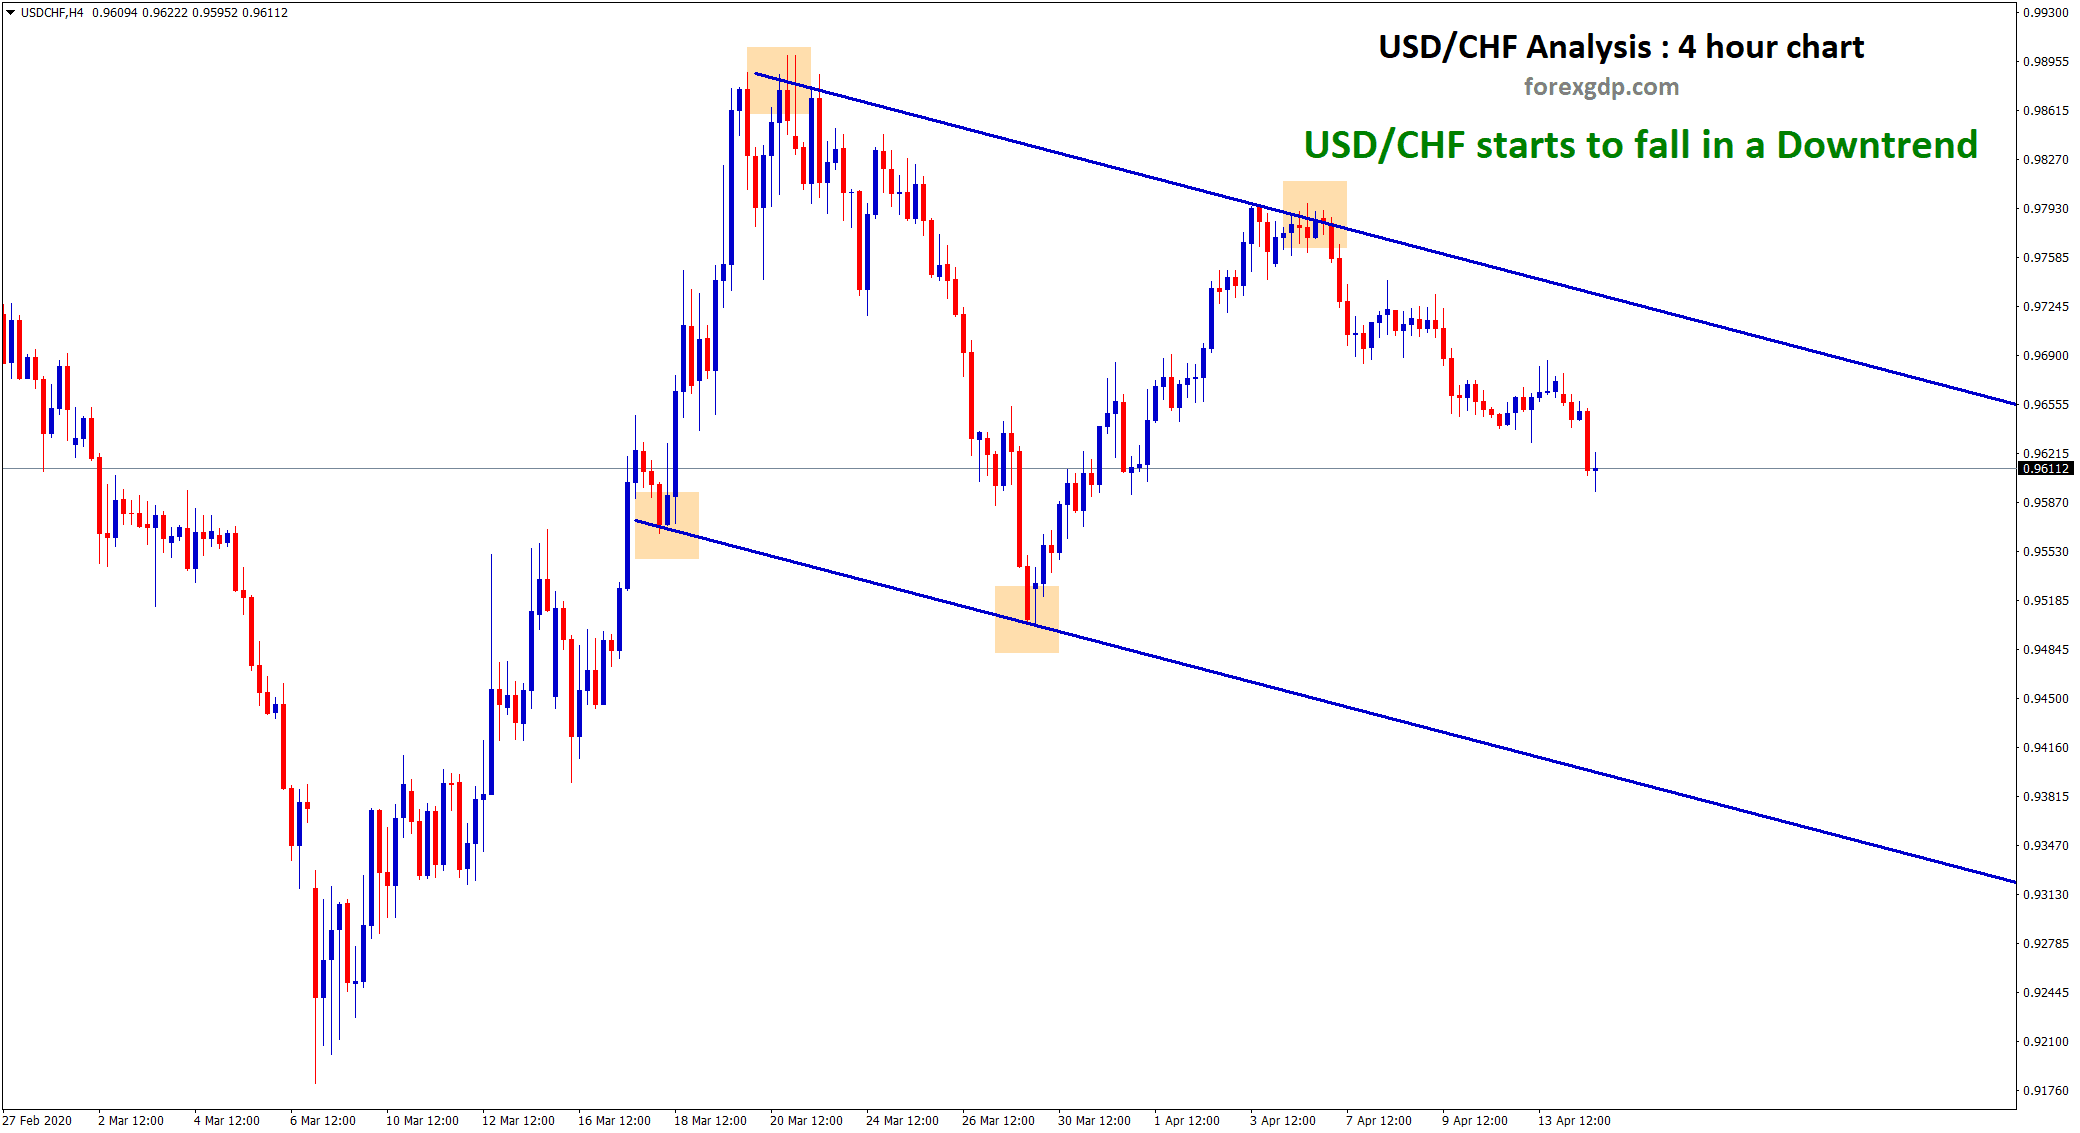 USD CHF fall down in a down trend range on 4 hour chart